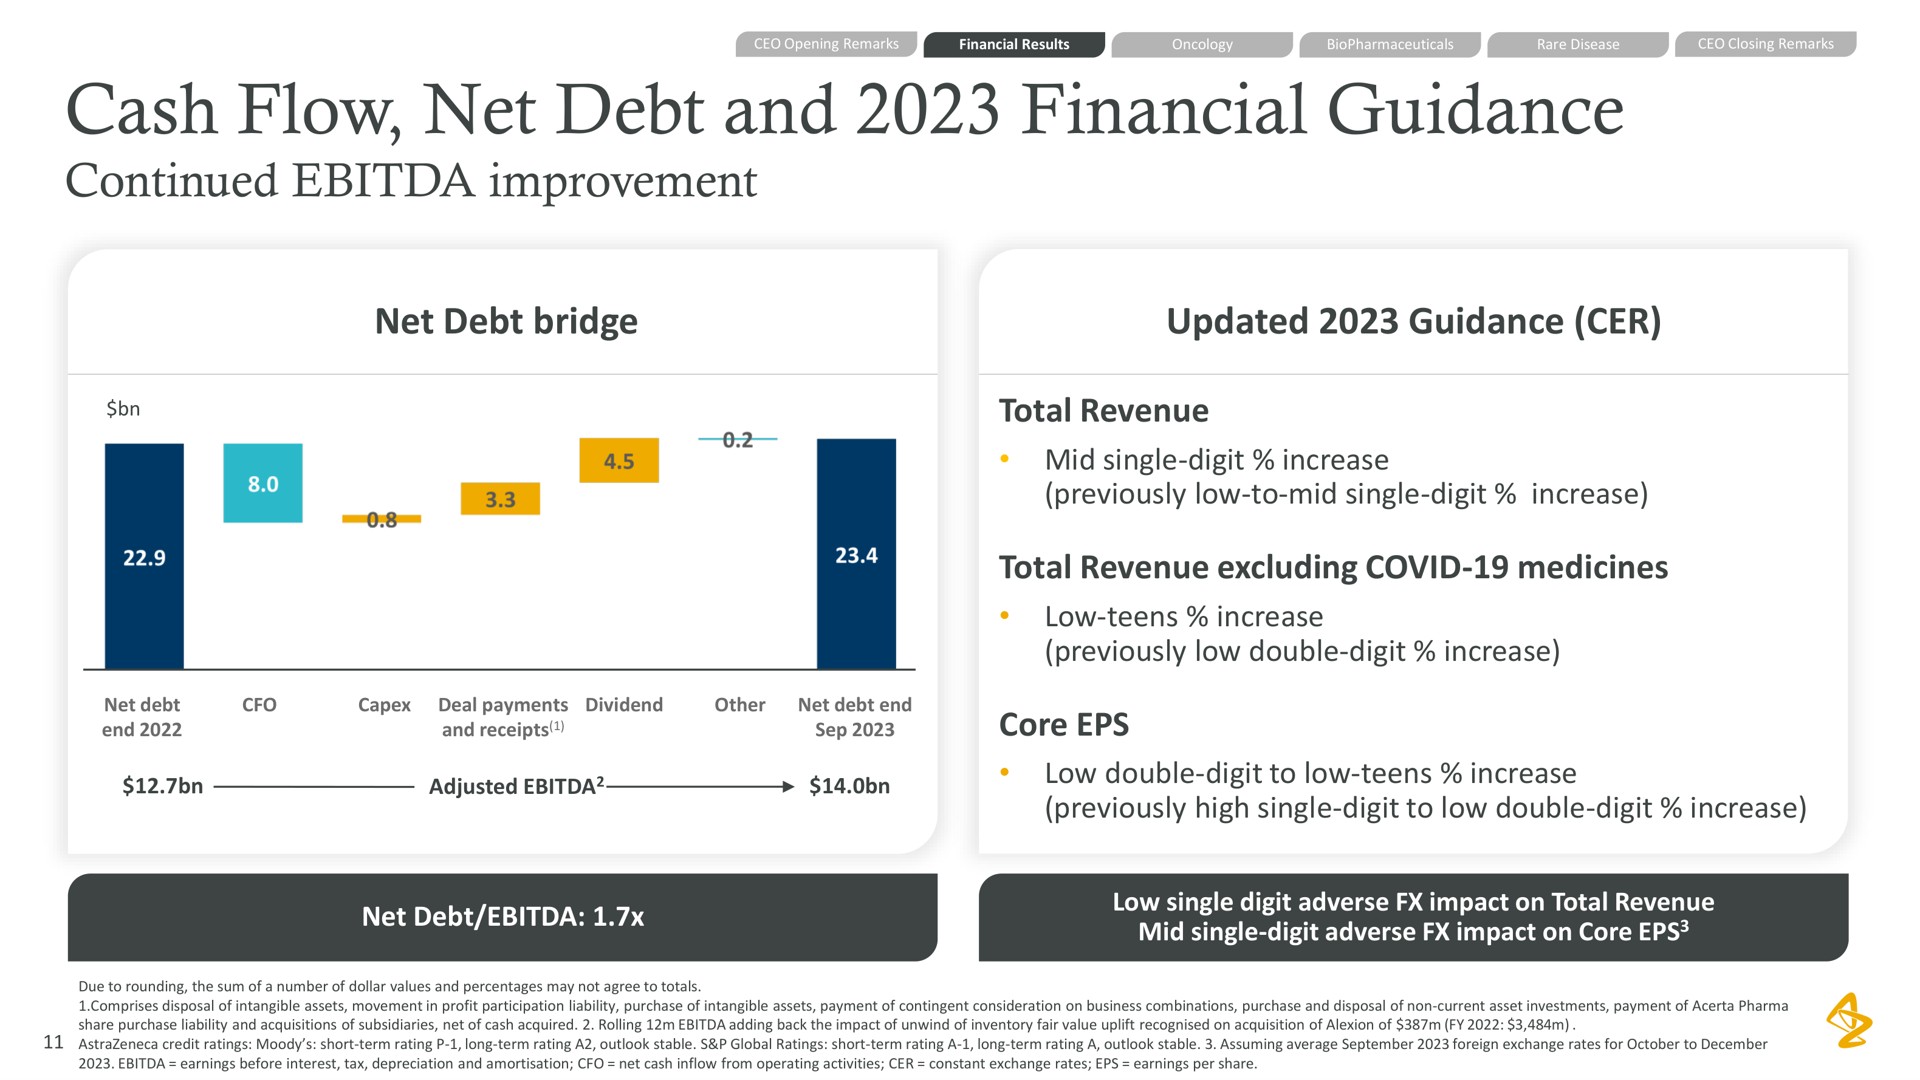 cash flow net debt and financial guidance continued improvement net debt bridge updated guidance total revenue mid single digit increase previously low to mid single digit increase total revenue excluding covid medicines low teens increase previously low double digit increase core low double digit to low teens increase previously high single digit to low double digit increase | AstraZeneca